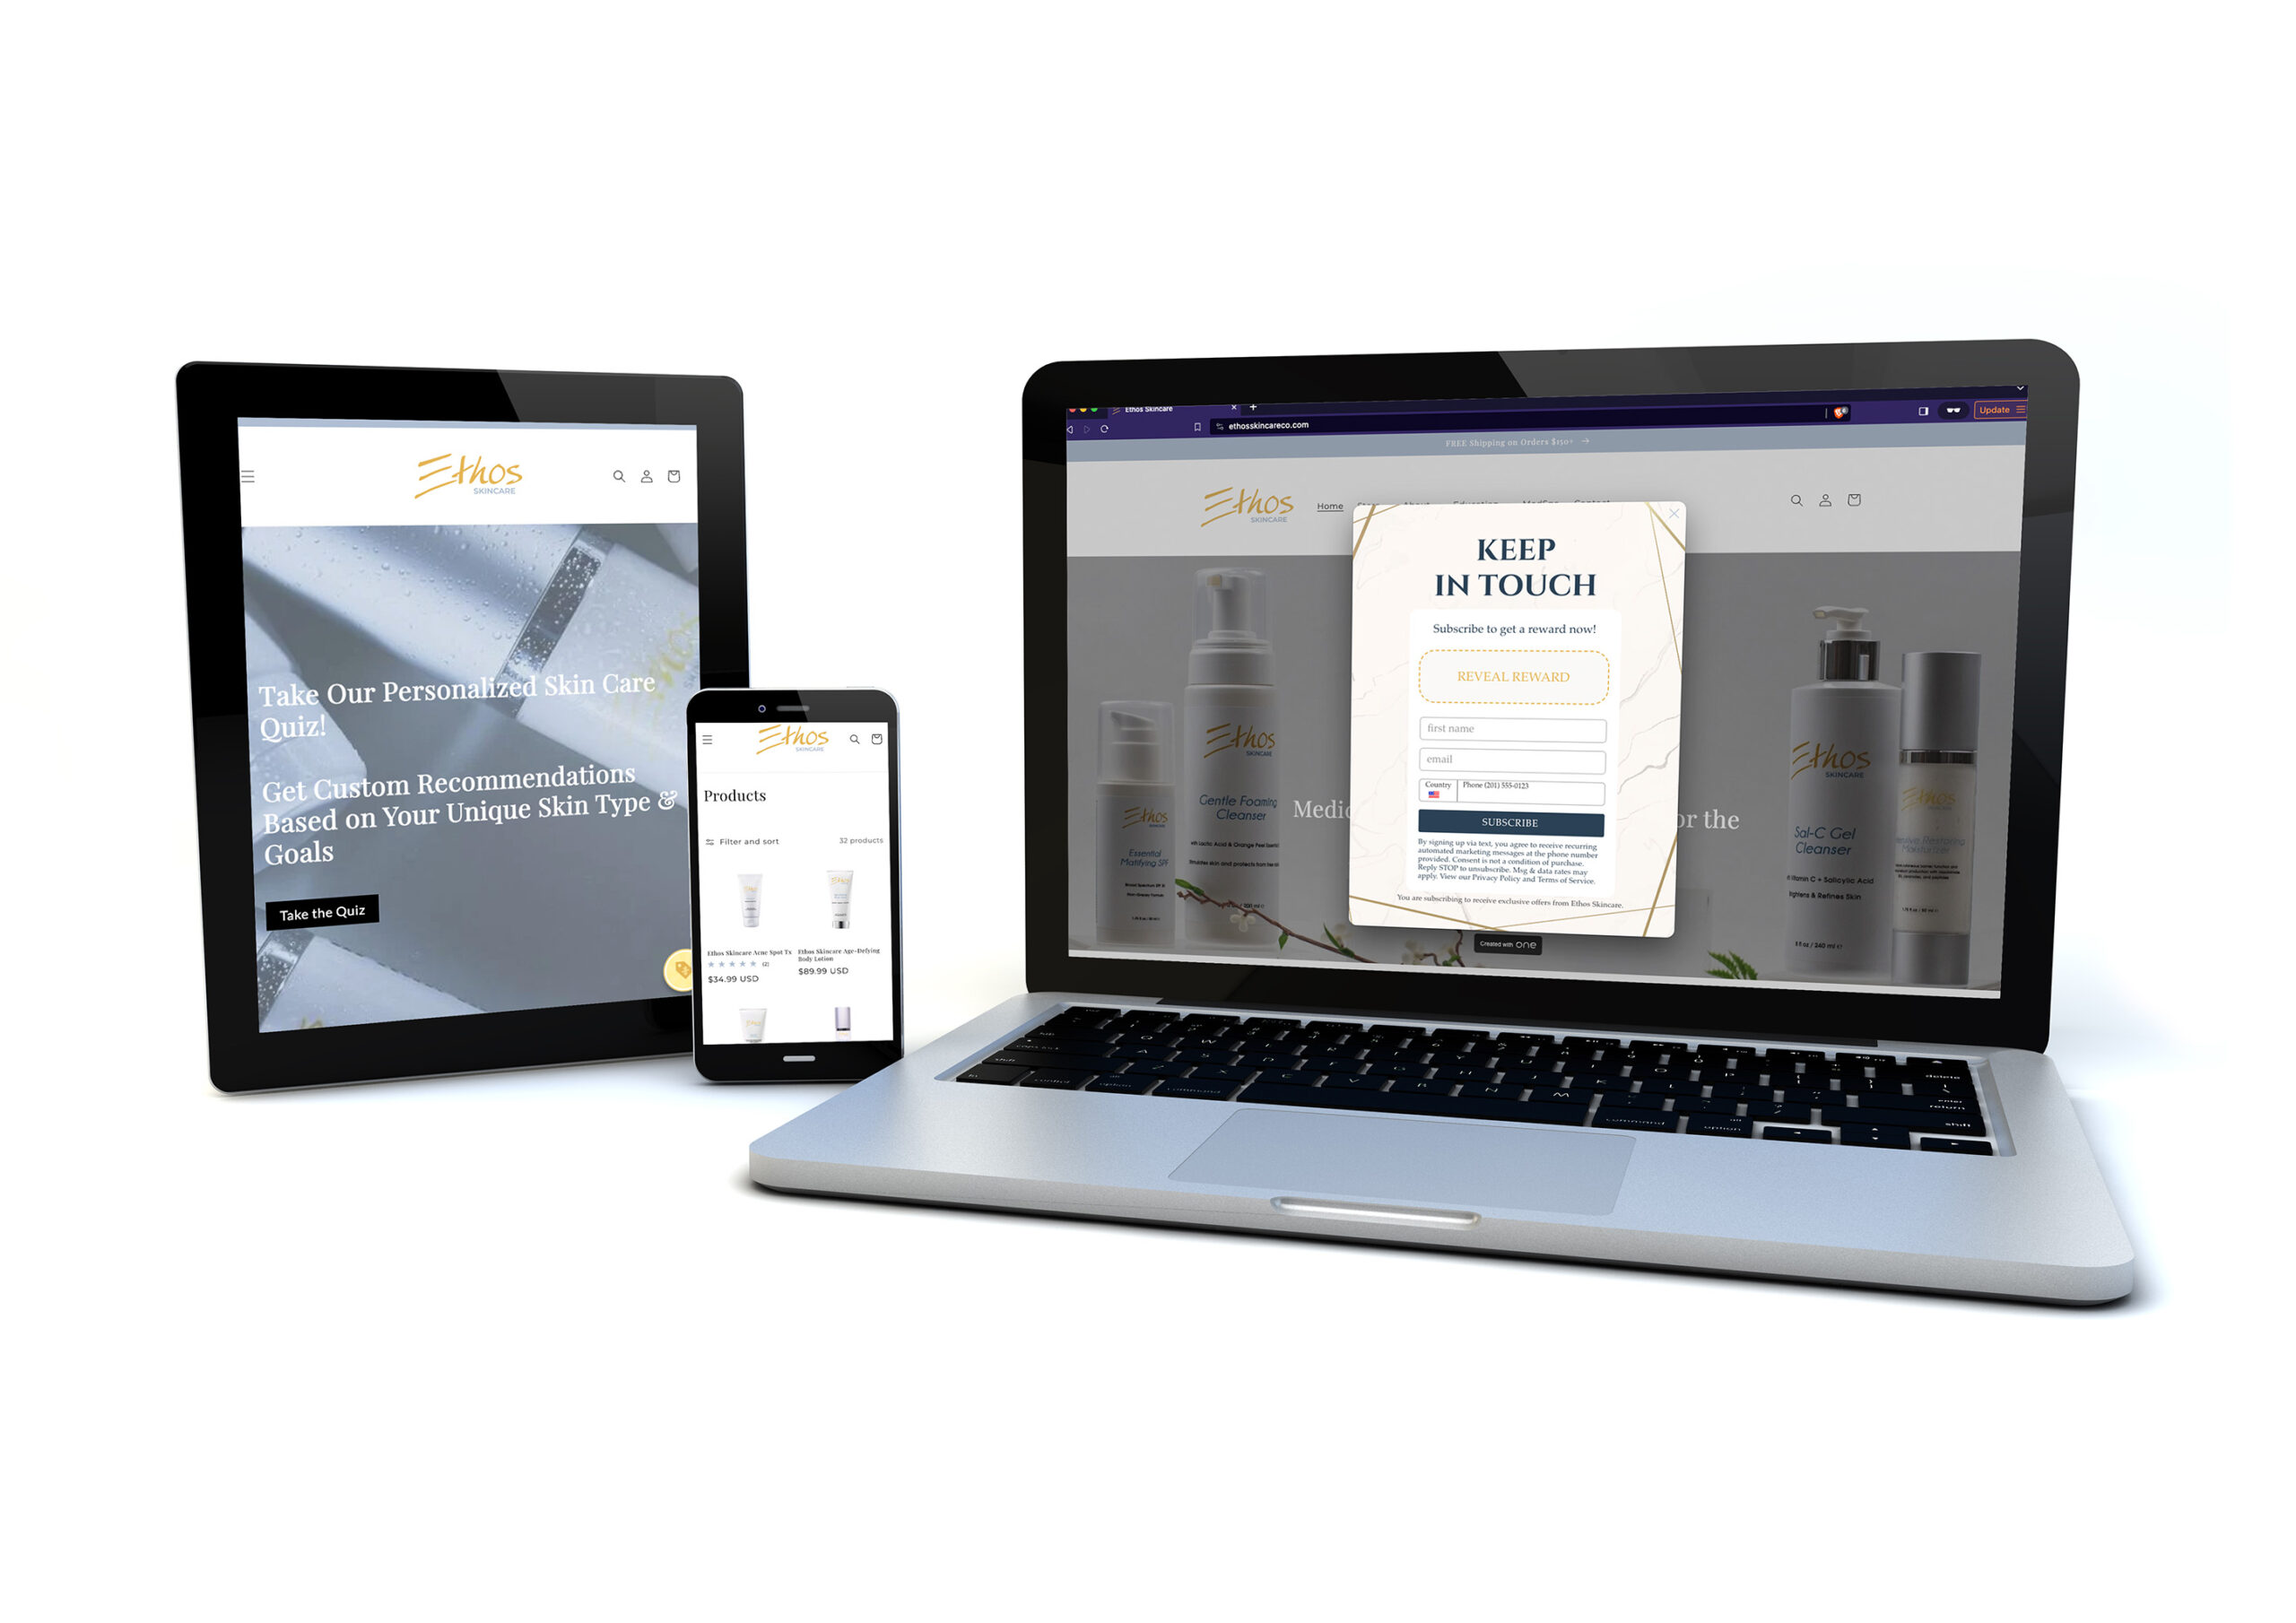 Different pages of the Ethos Skincare Co website on a laptop, tablet, and phone.